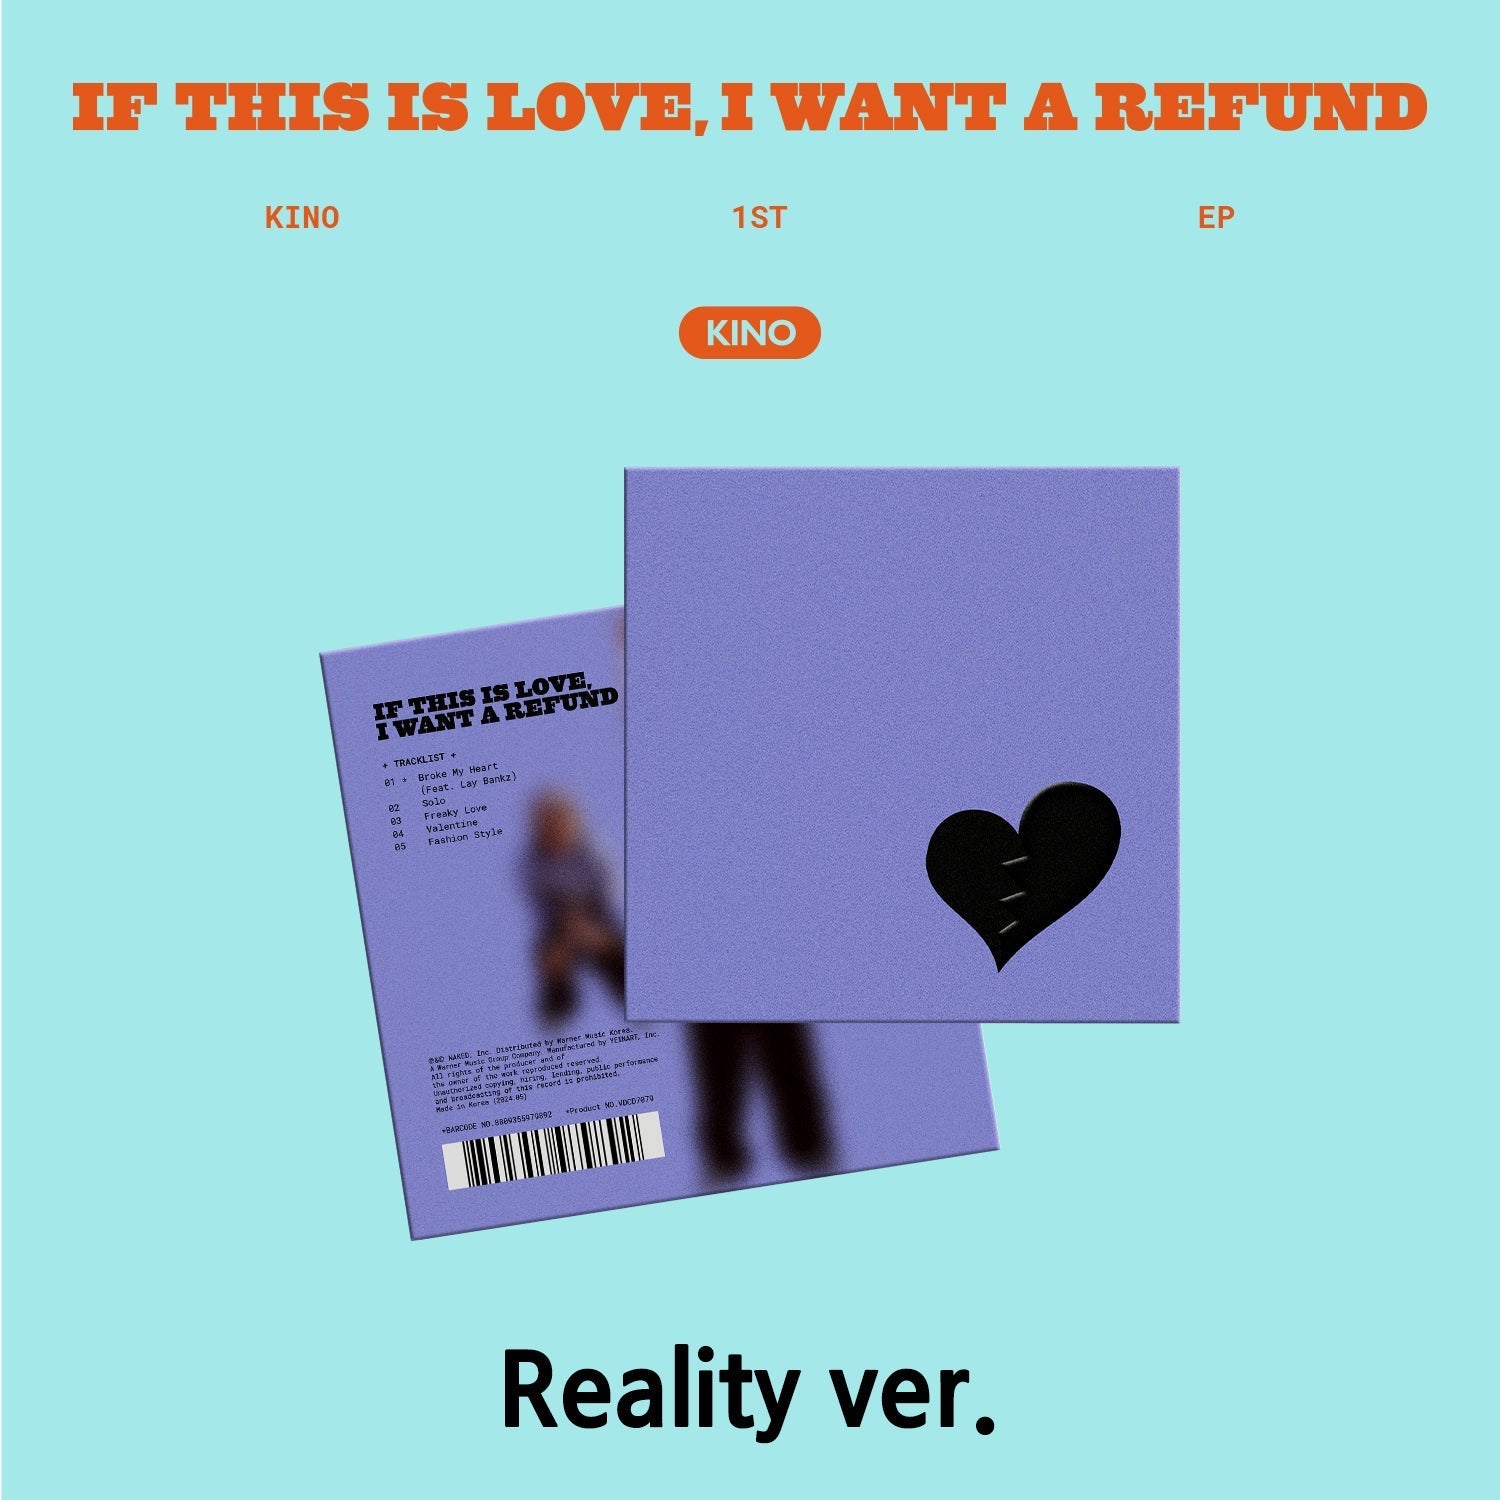 KINO - [If this is love, I want a refund] Reality ver. - KPOPHERO